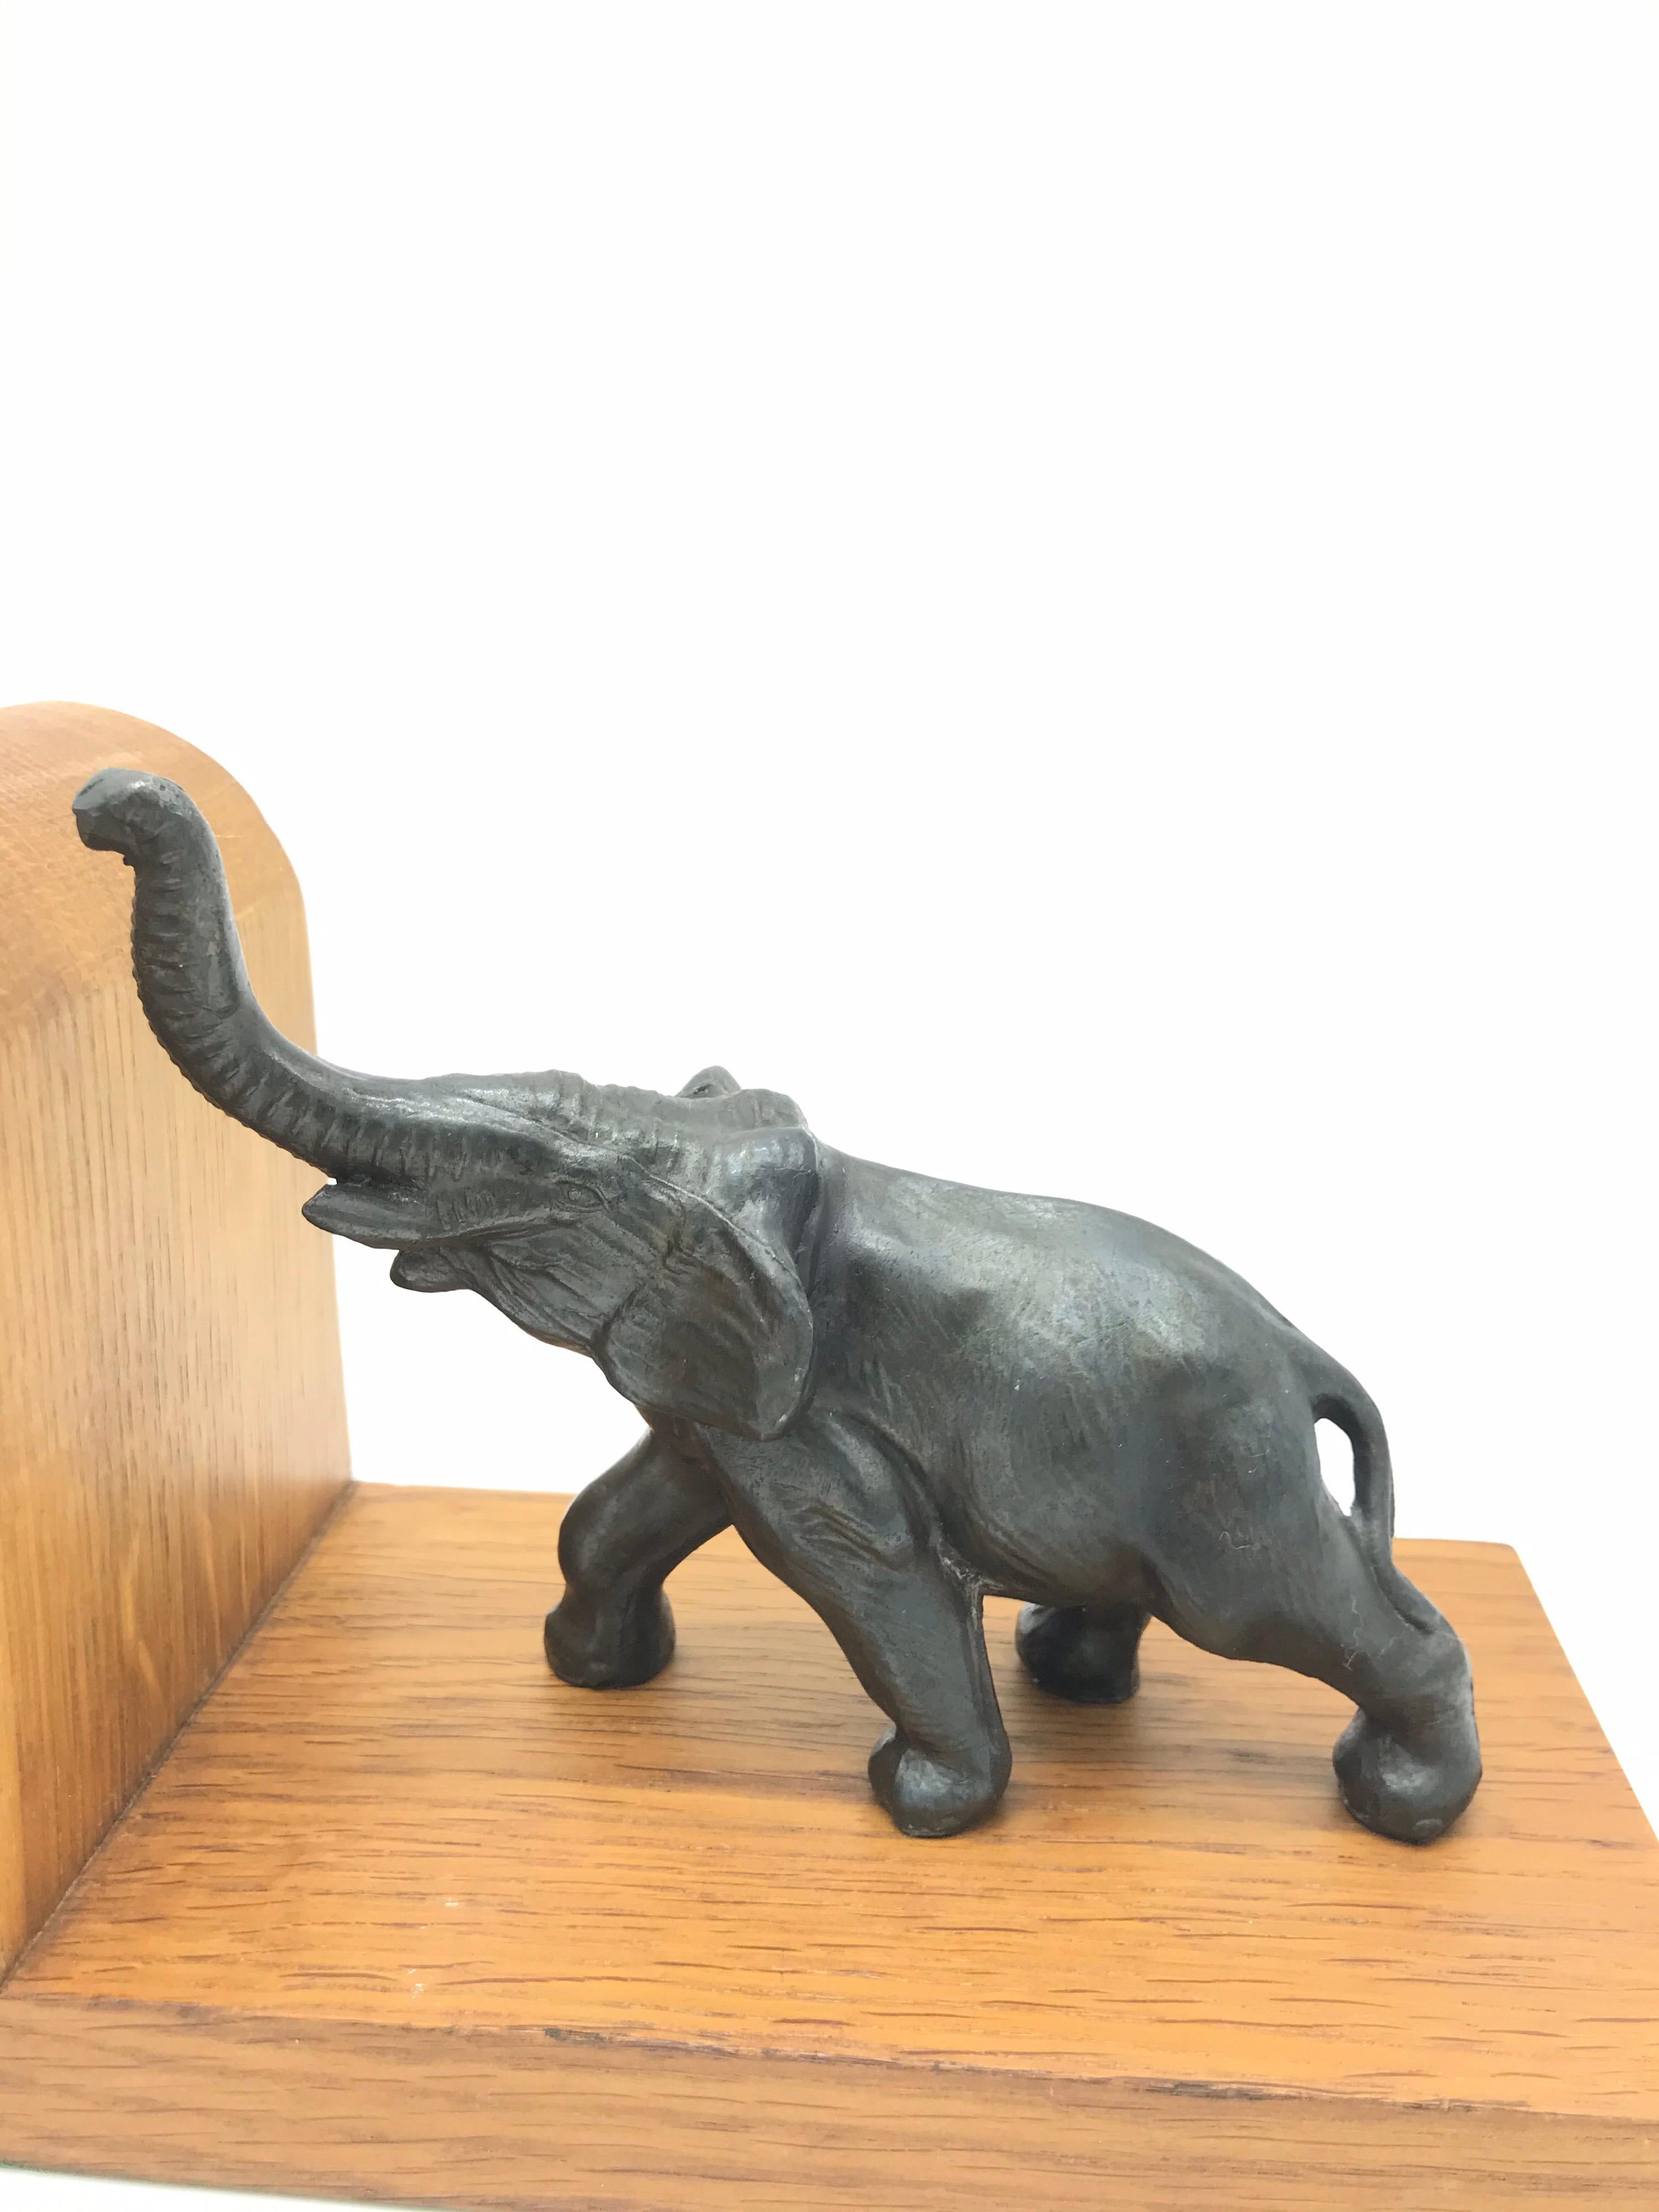 Amazing Pair of Art Deco Elephant Book Ends from the 1930s 1